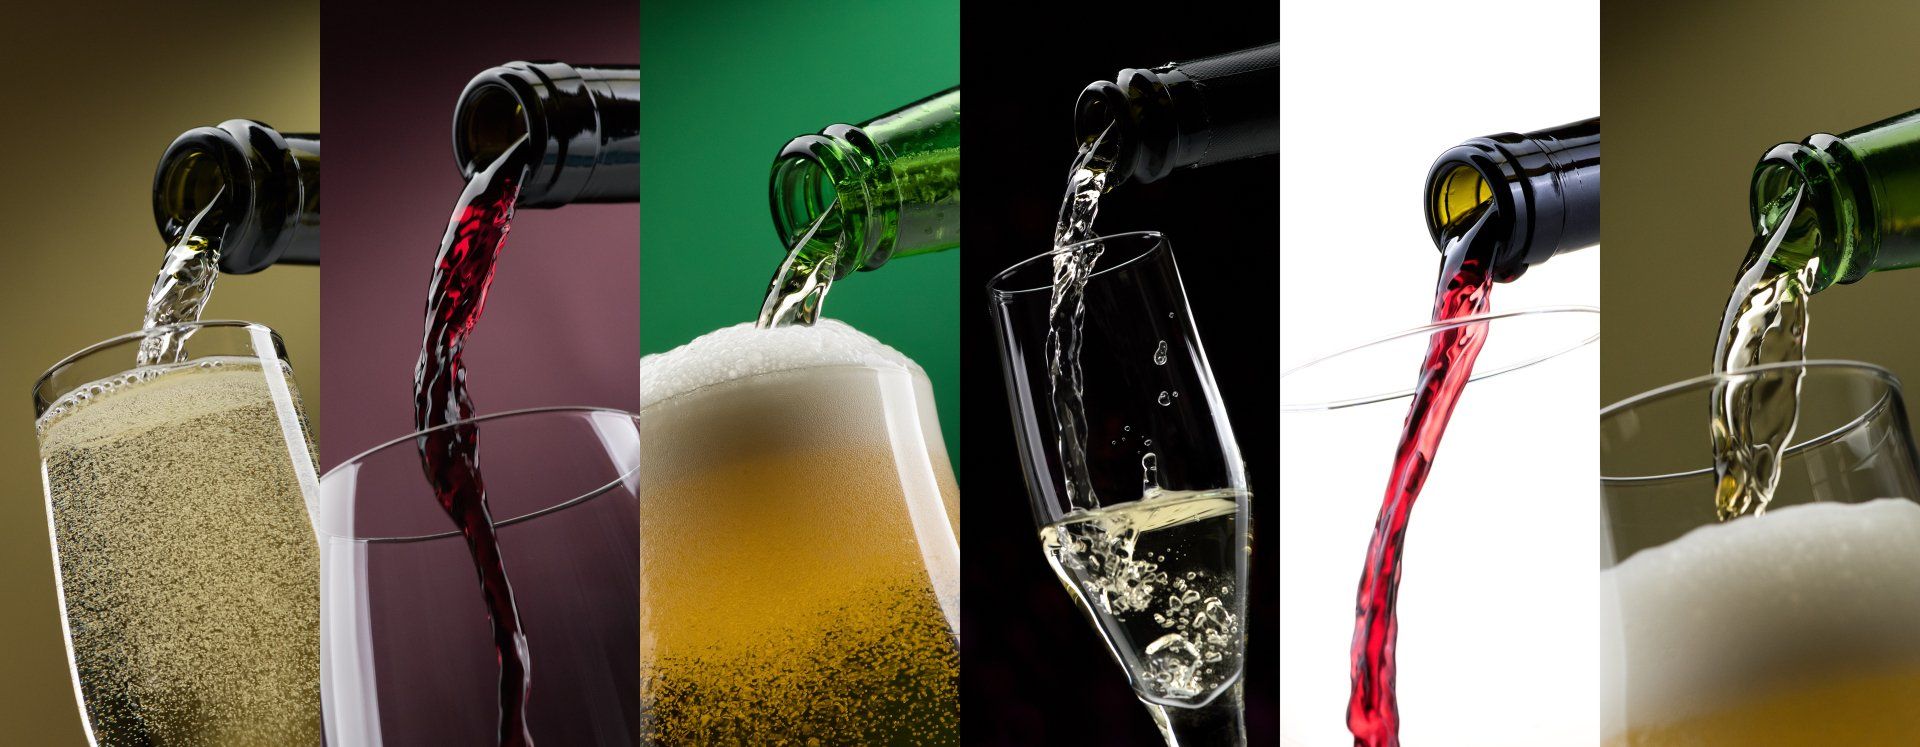 Pouring alcoholic drinks into glasses photo collage: beer, red wine and white wine